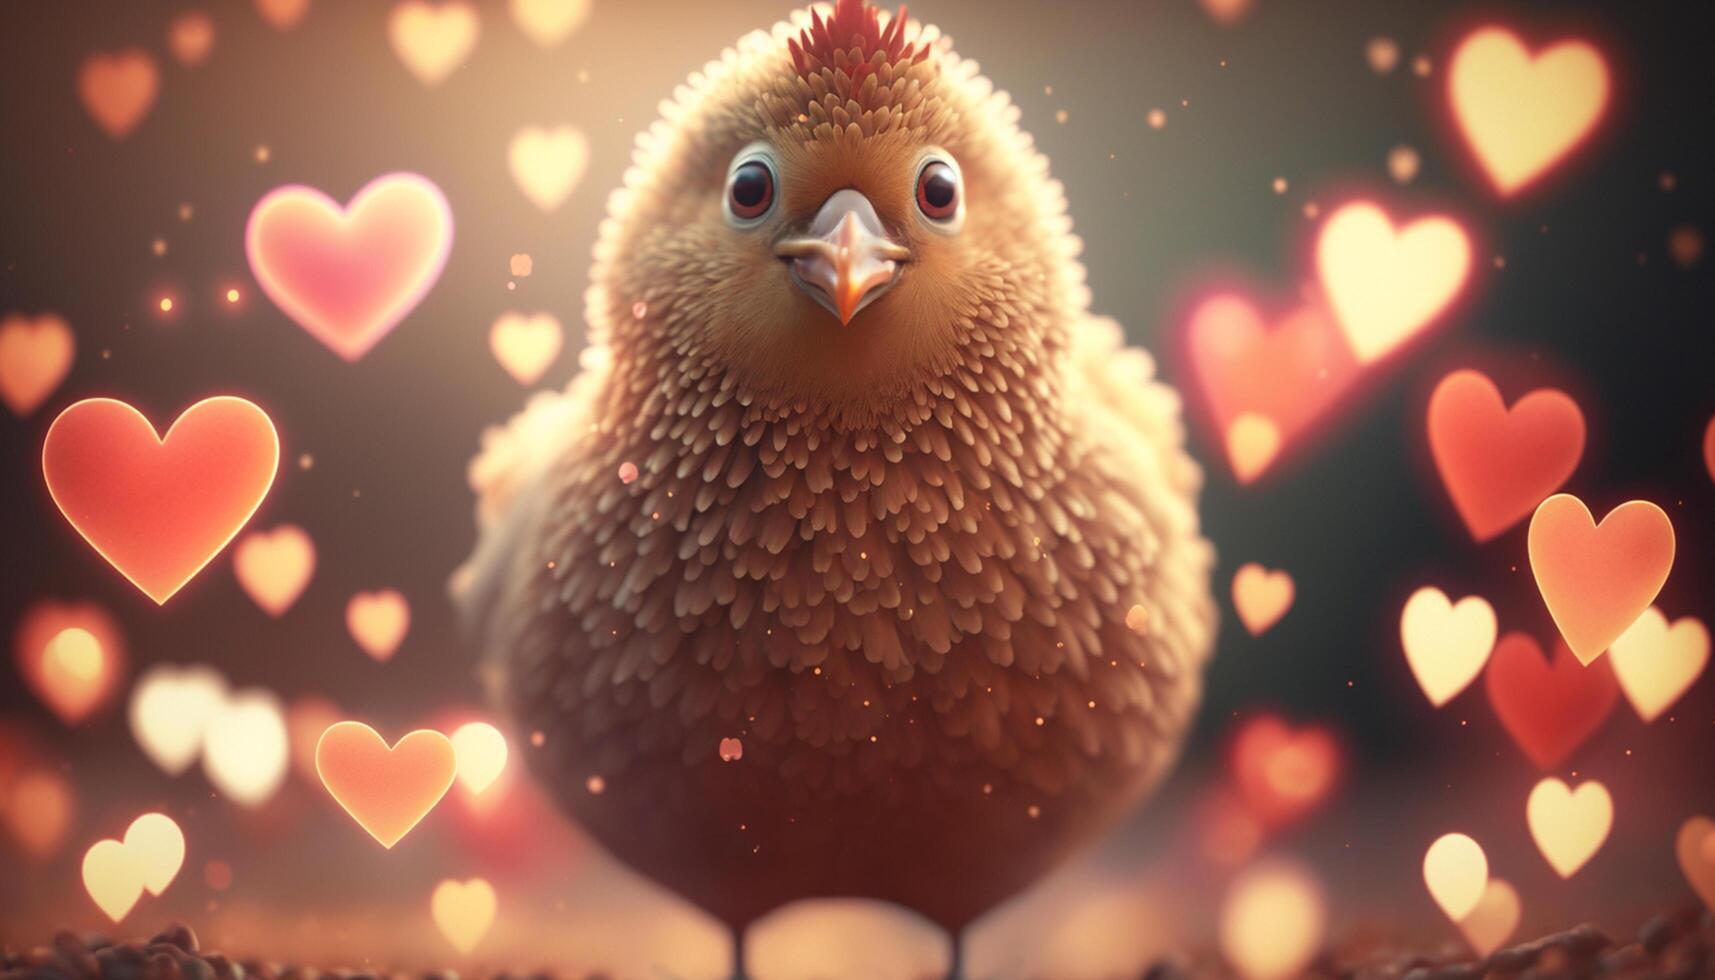 Love Chick A Valentine's Day Heartwarming Surprise from a Cute Baby Chicken photo